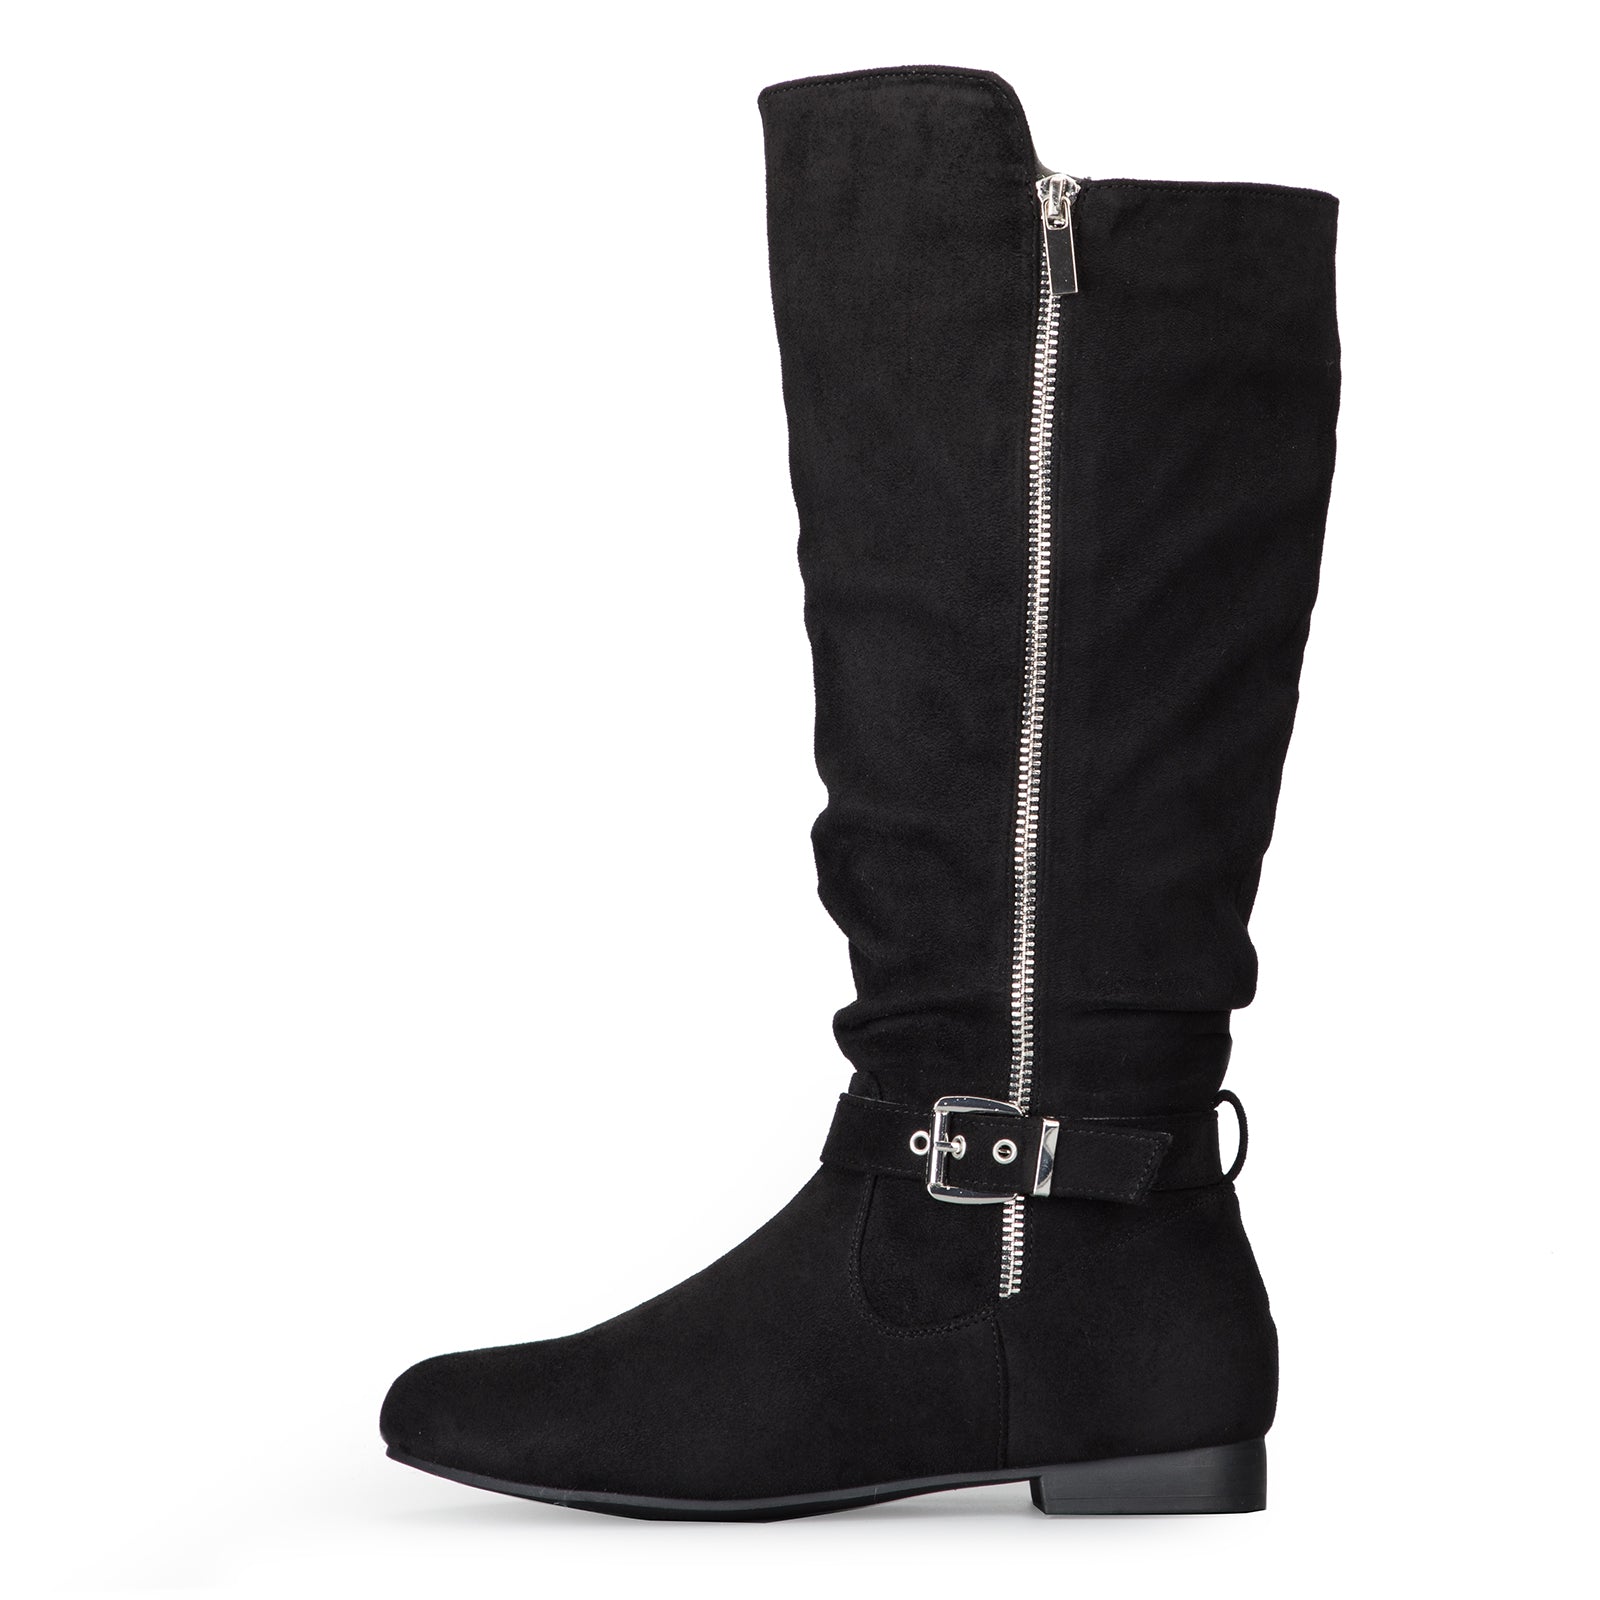 Stacked Knee High Boots with Side Zipper - MYSOFT